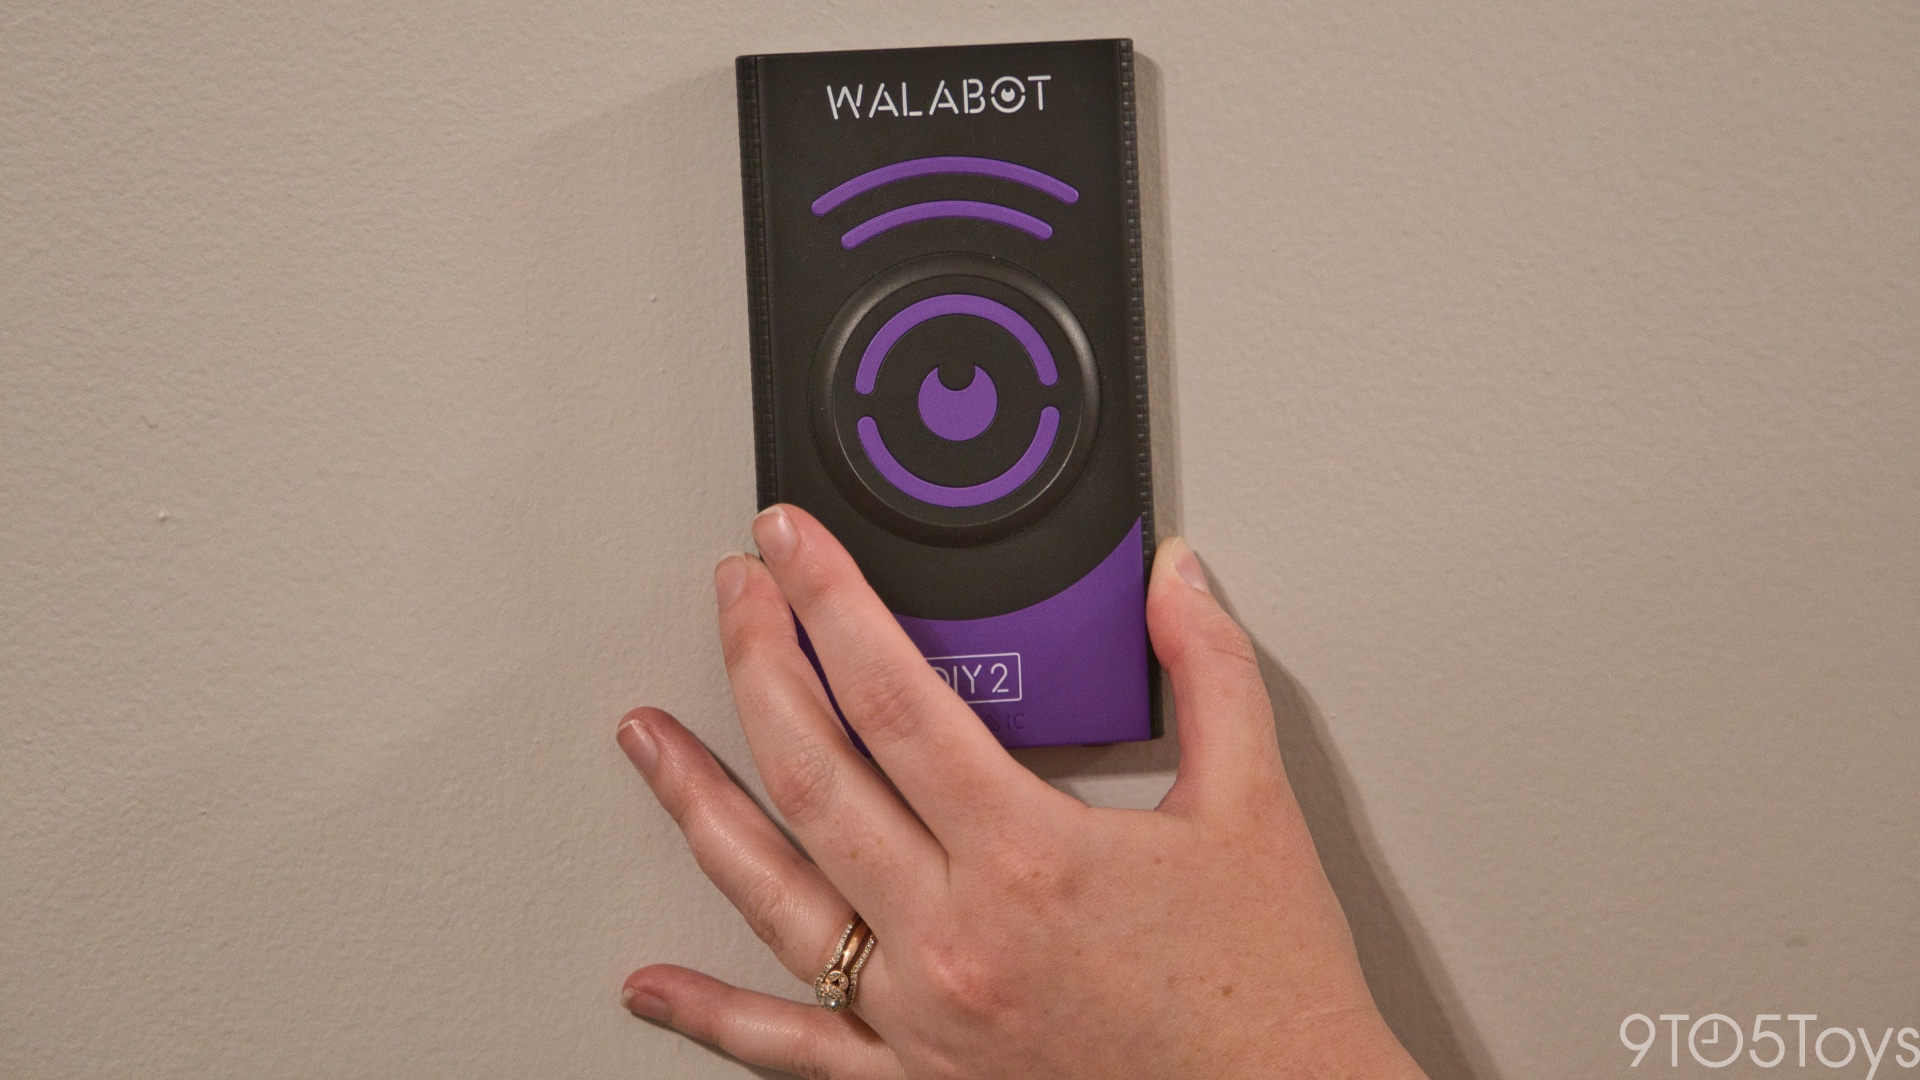 The Walabot DIY 2 is the most advanced stud finder on the market